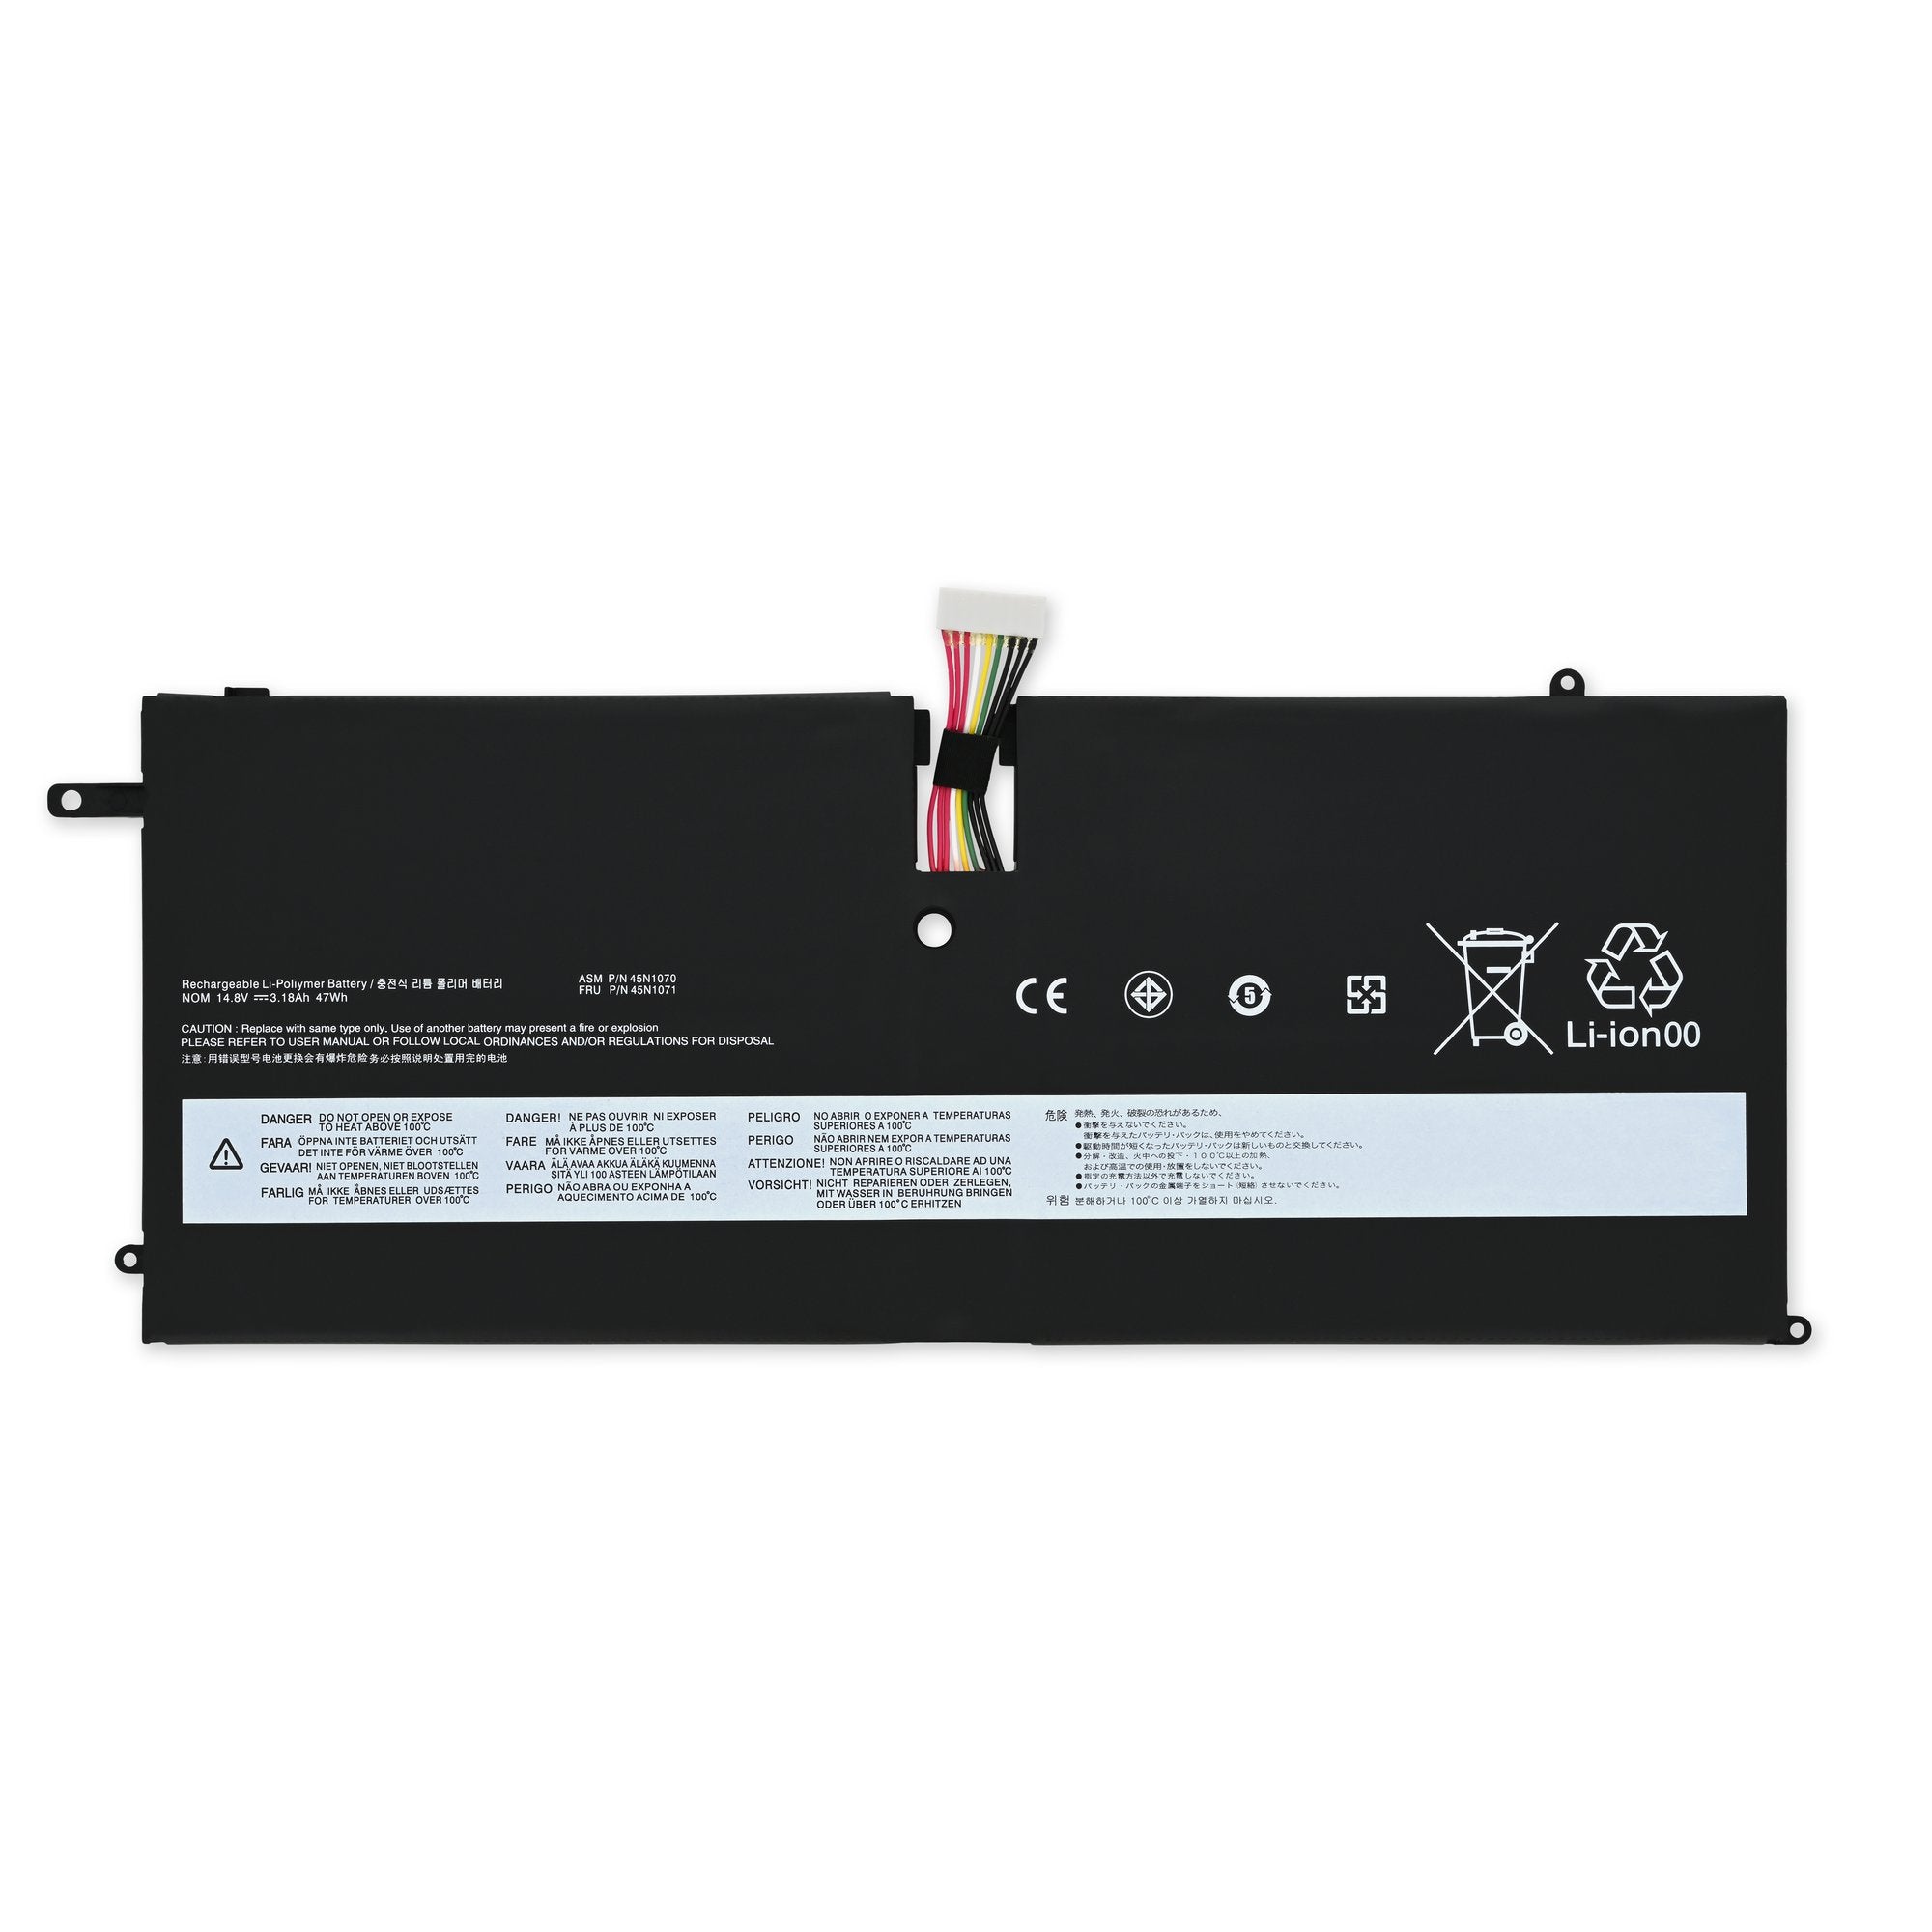 Lenovo ThinkPad X1 Carbon Gen 1 (2012) Battery New Part Only